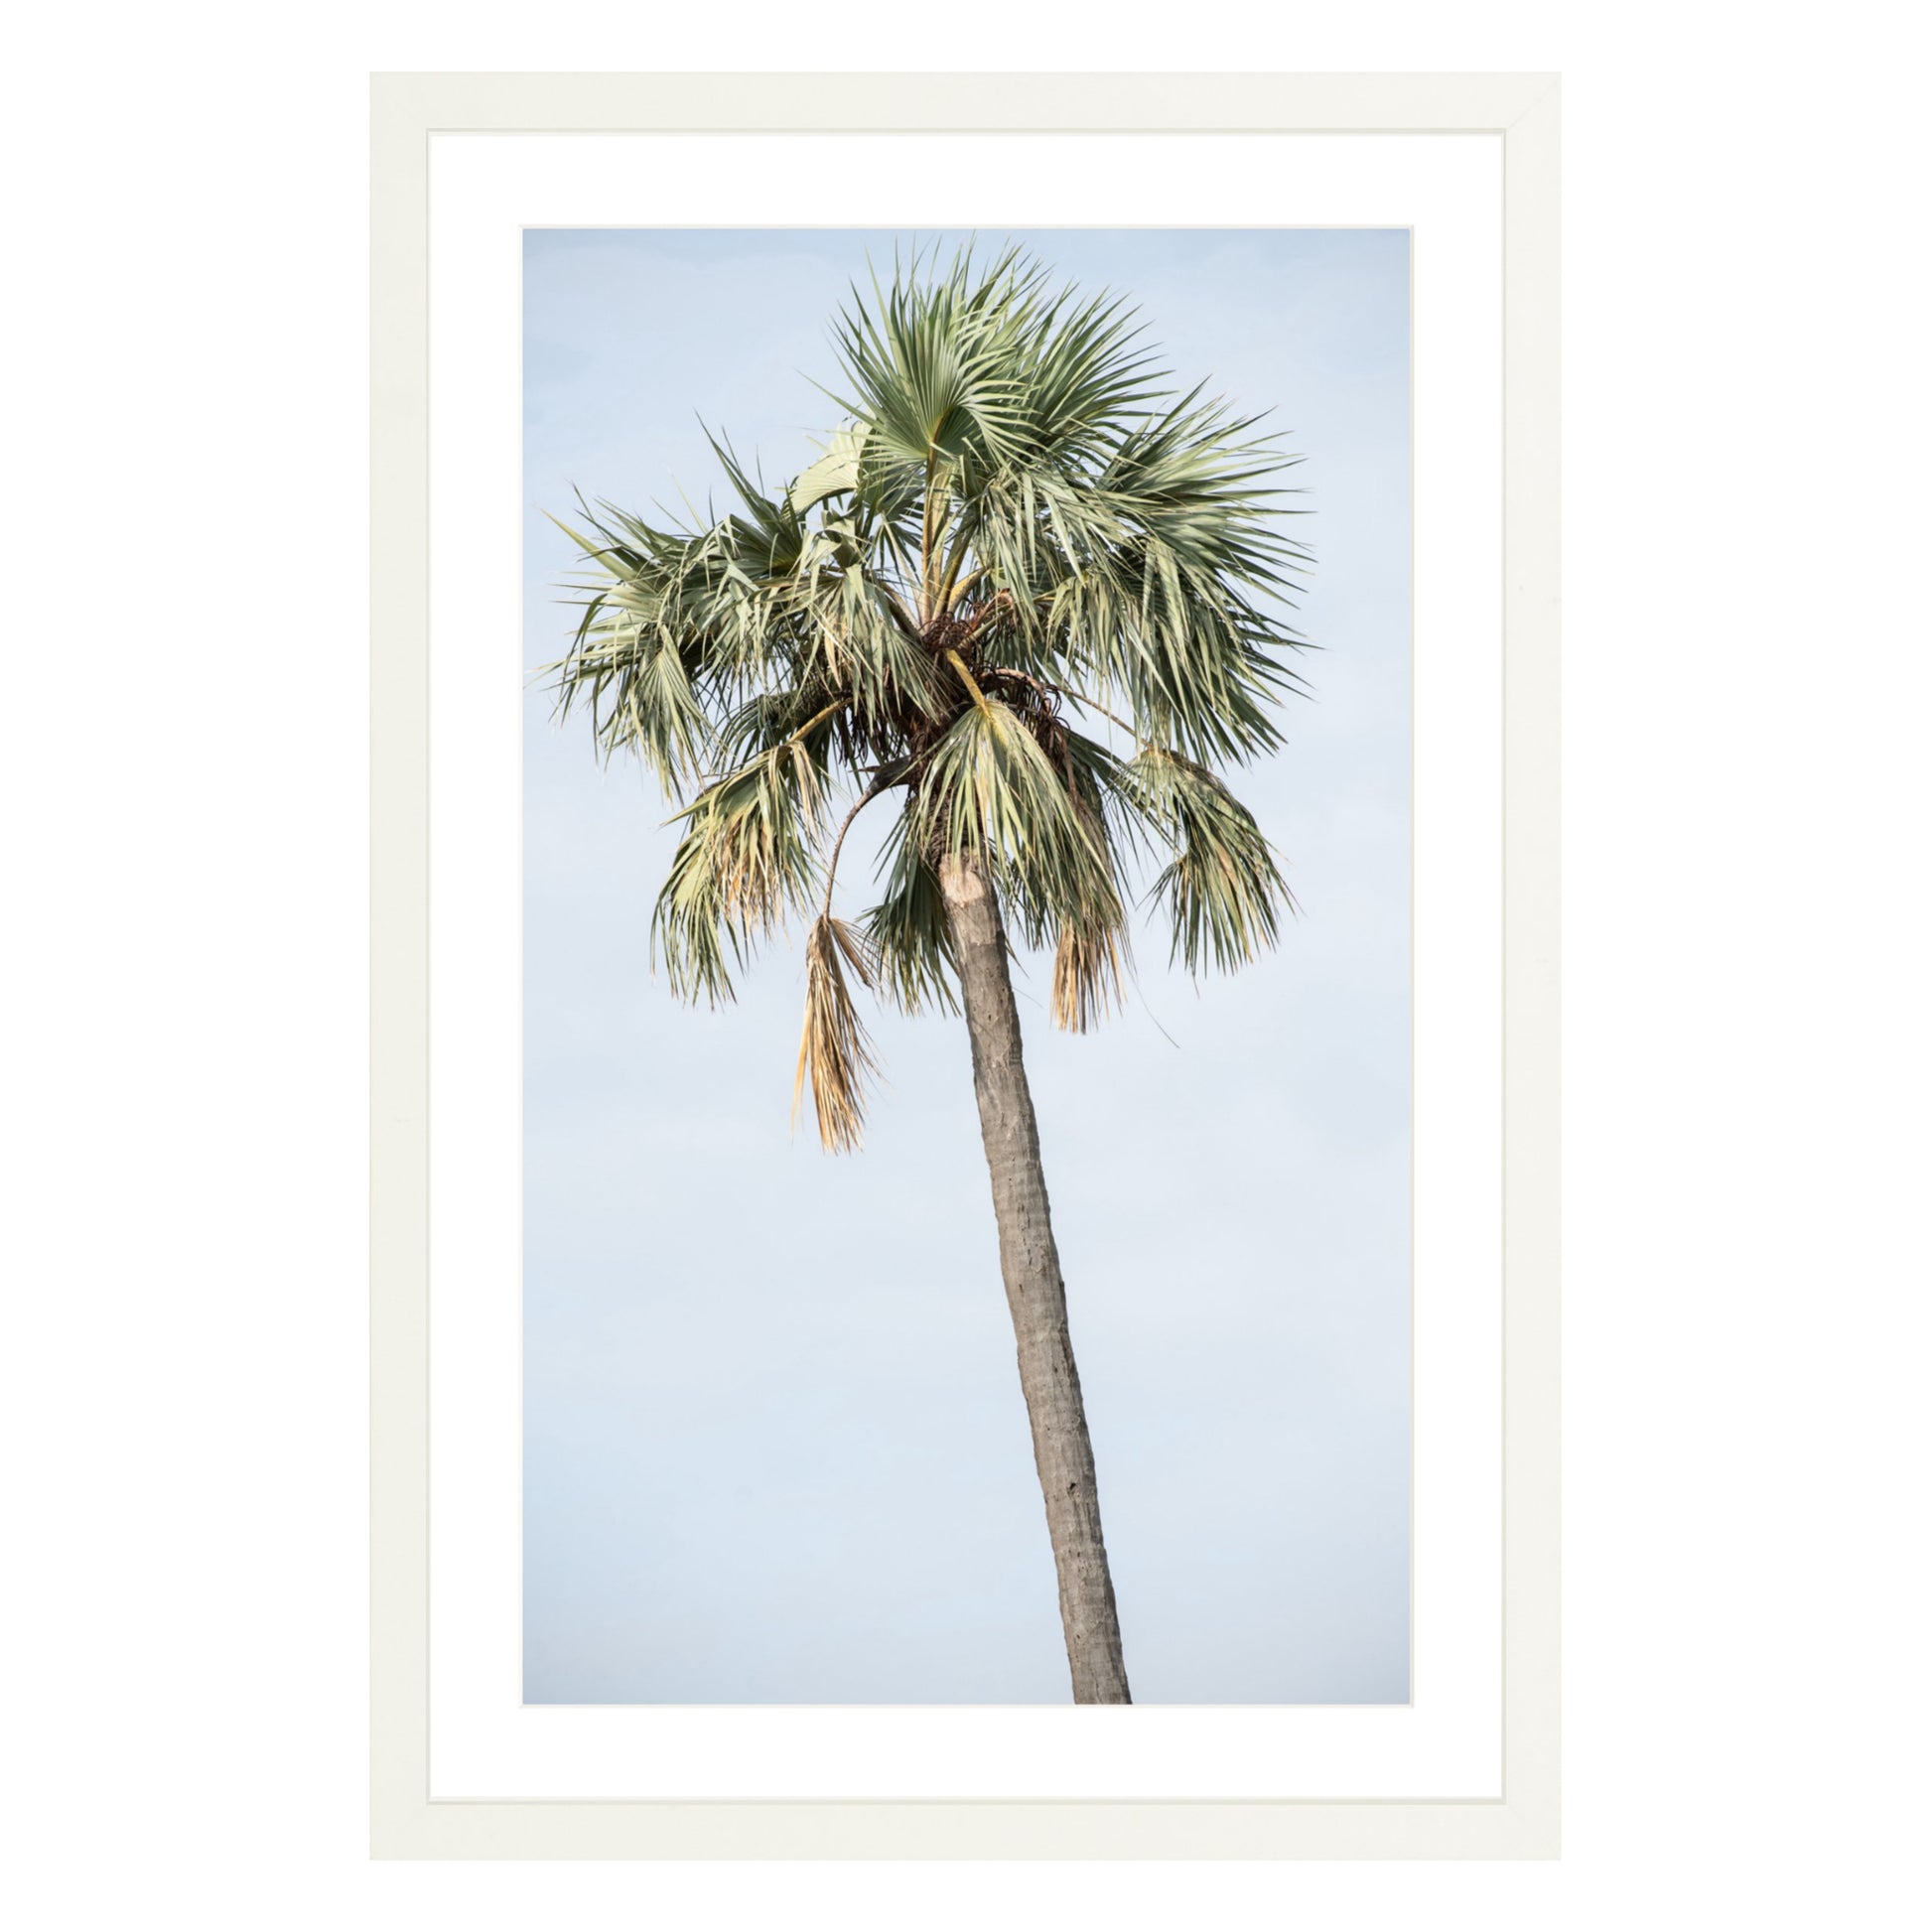 Photograph of a palm tree in Tanzania, framed in white with white mat